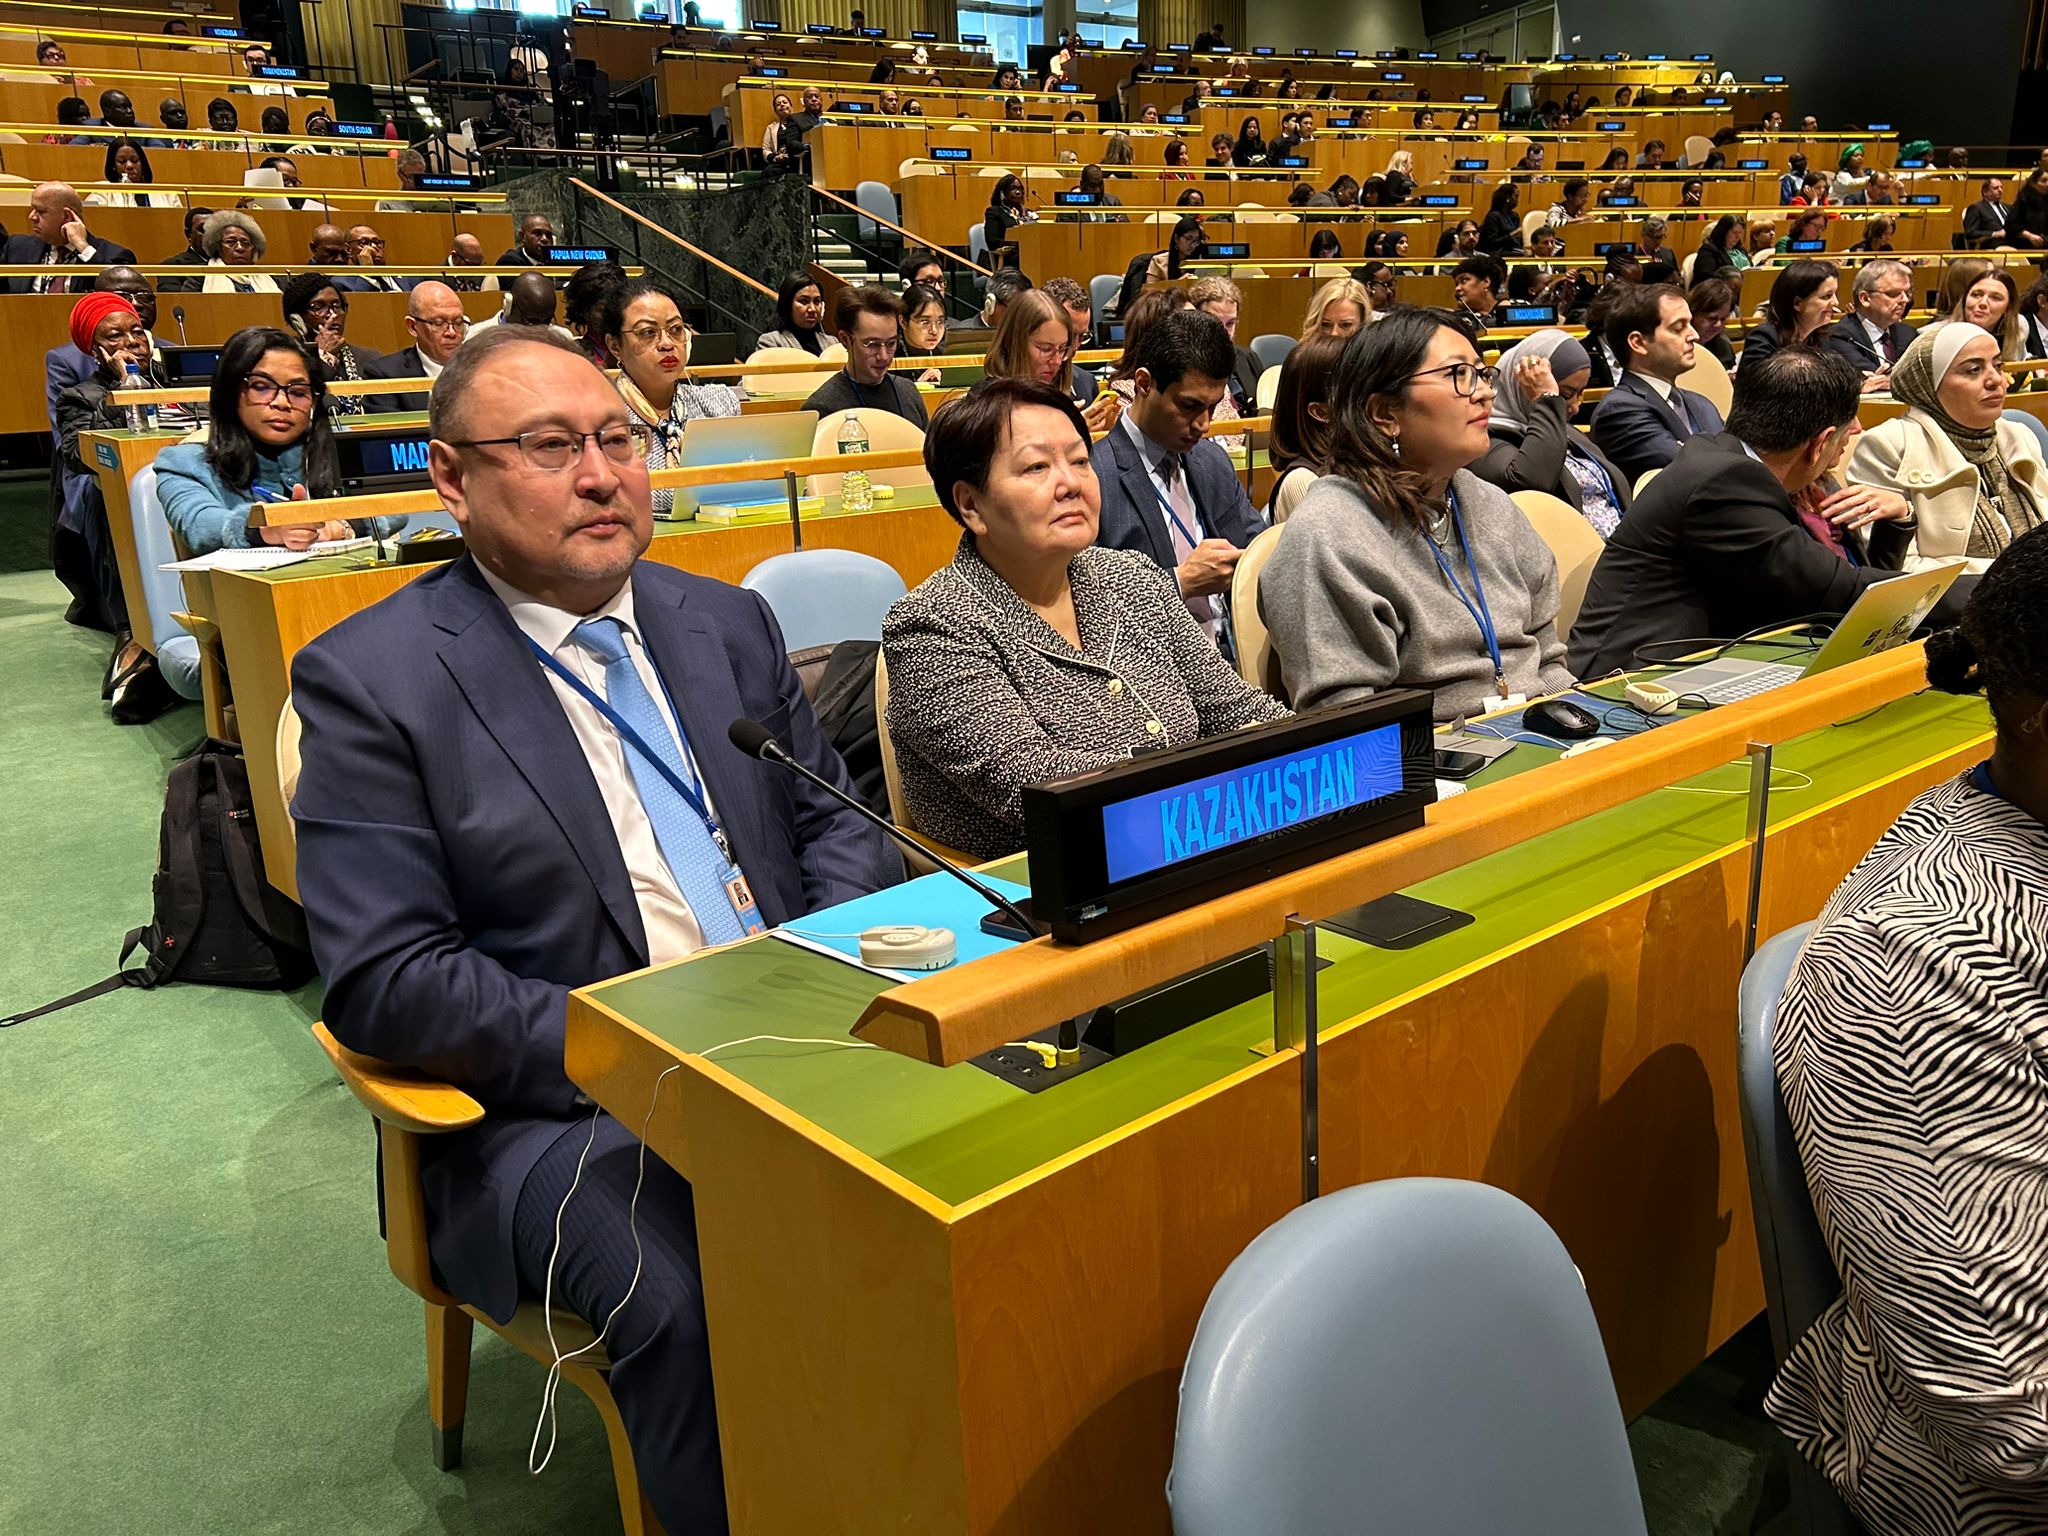 From left to right: Madina Jarbussynova, National Expert, UN Women Kazakhstan, H.E. Akan Rakhmetullin, Permanent Representative of the Republic of Kazakhstan to the UN, and Zhanna Gazizullina, First Secretary of the Ministry of Foreign Affairs of Kazakhstan. Photo: Courtesy of Ministry of Foreign Affairs of Kazakhstan.